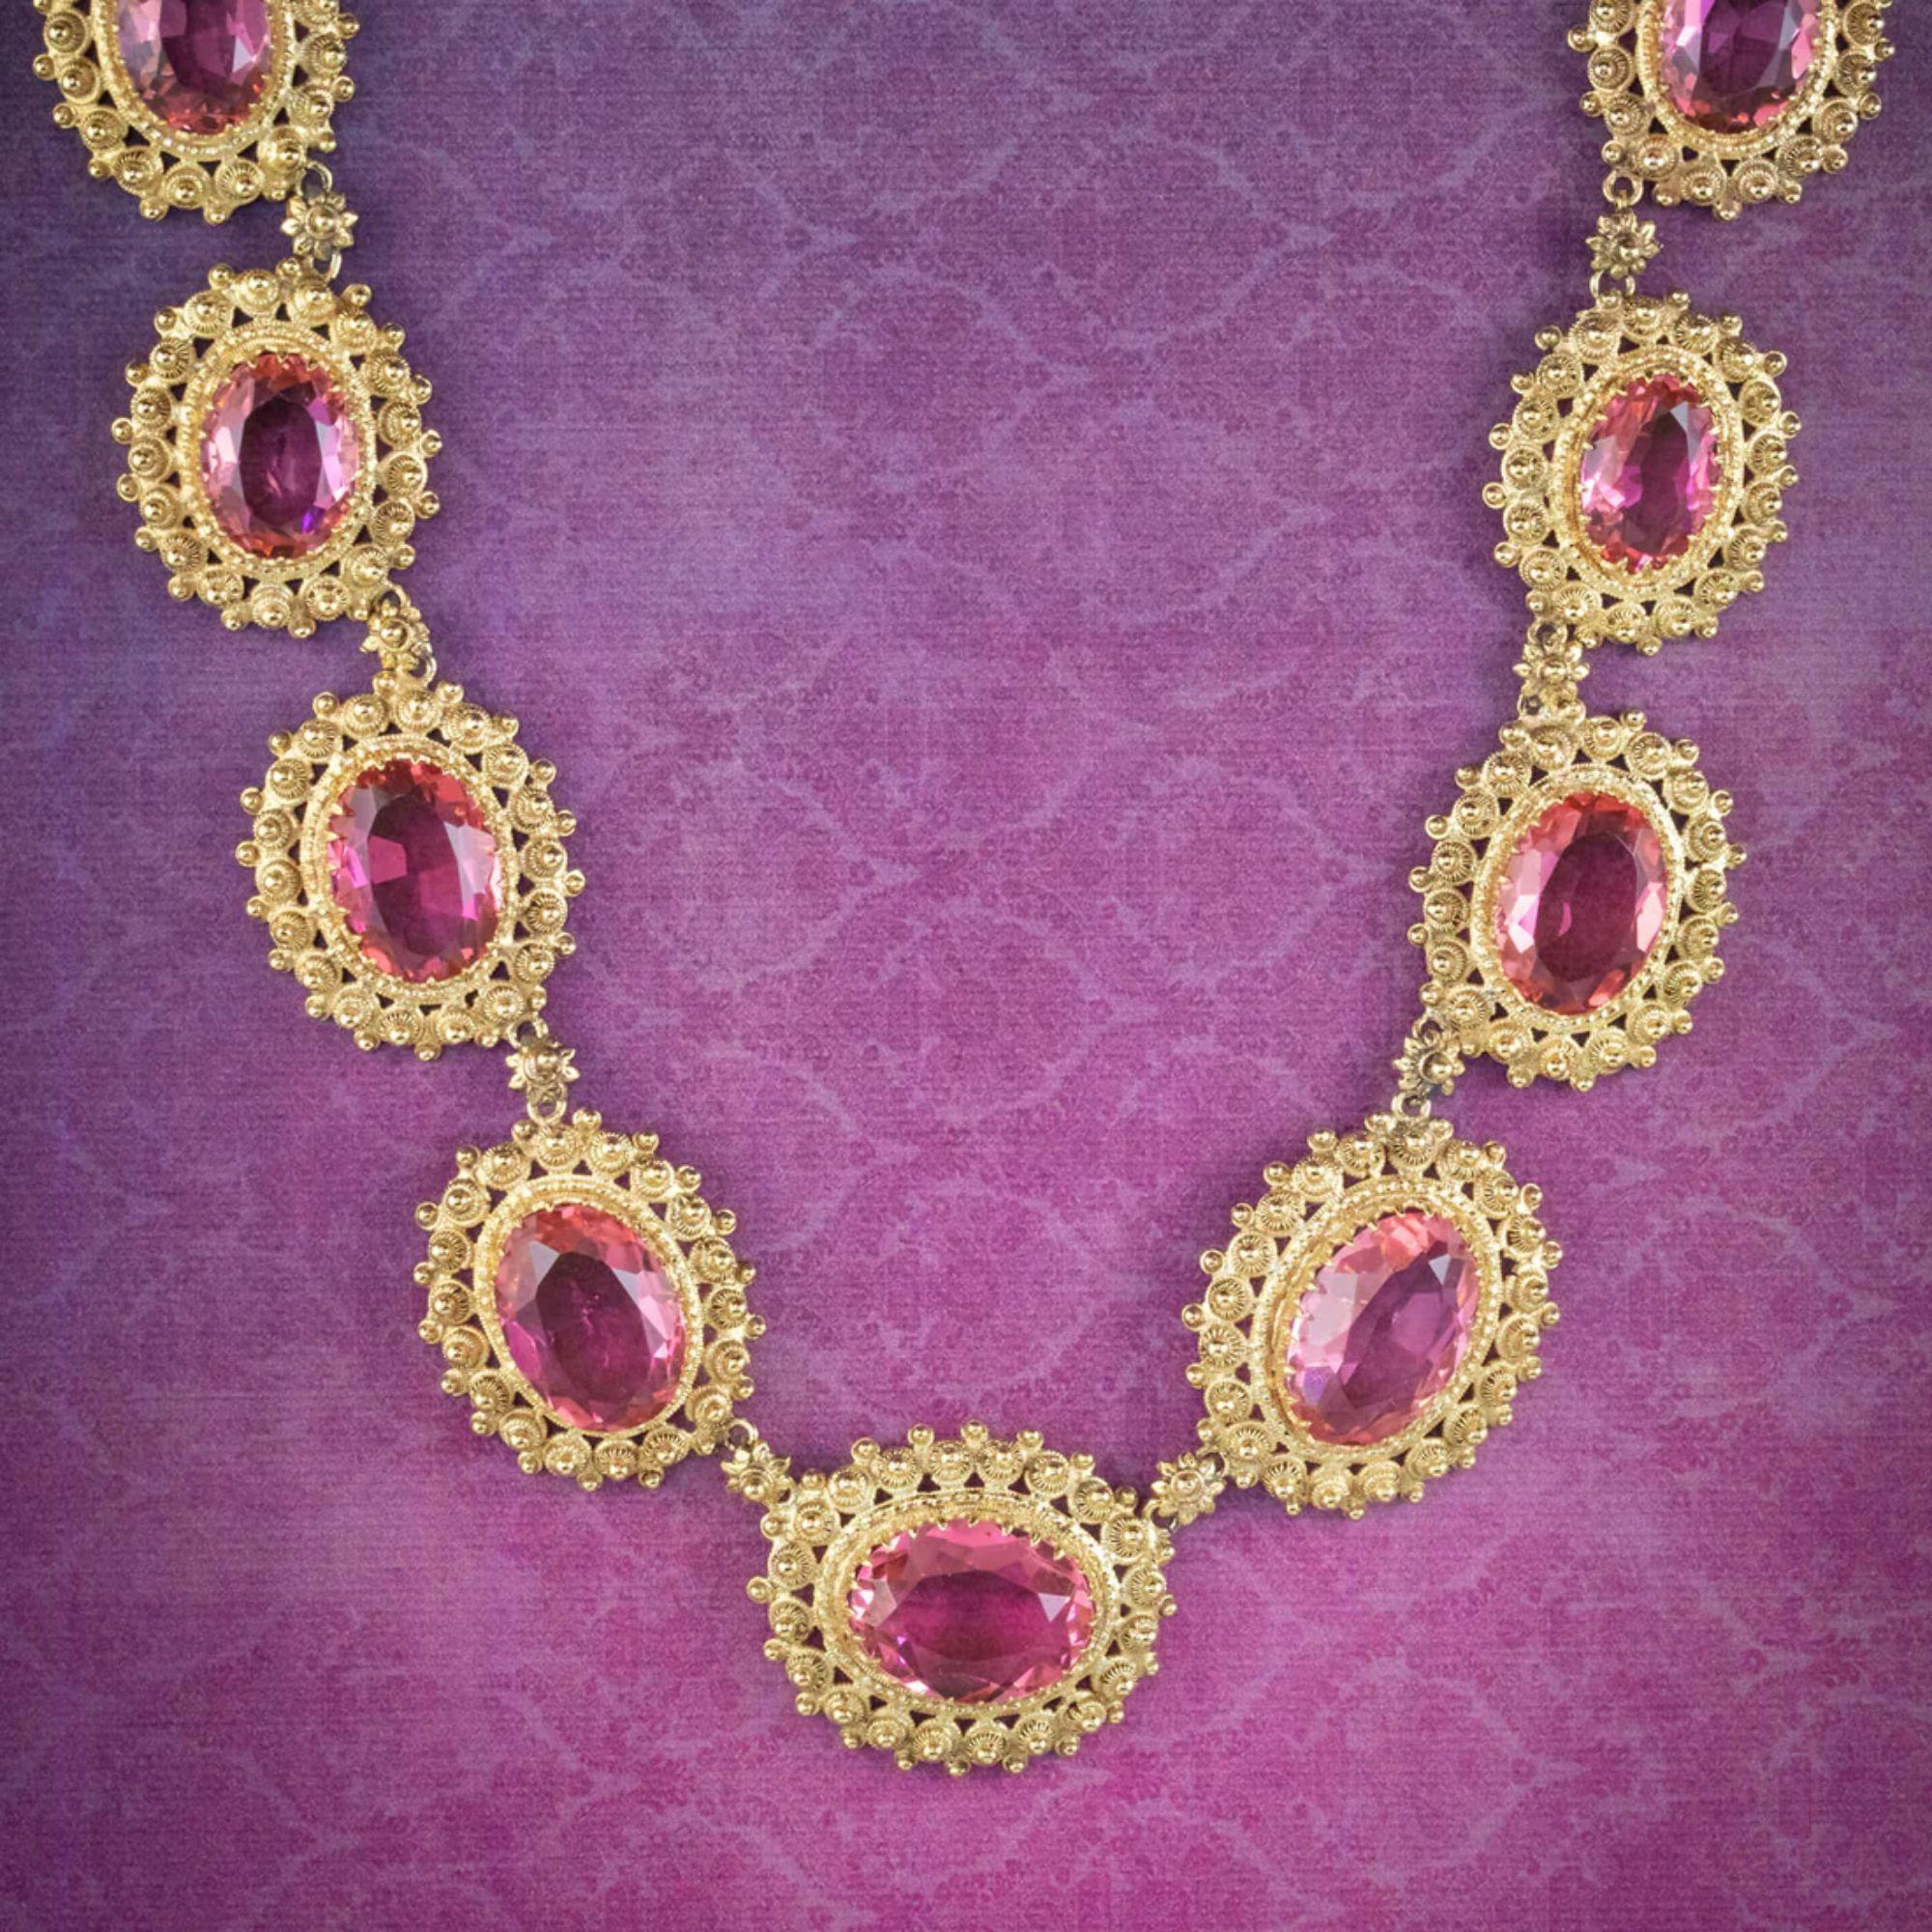 Antique Victorian Cannetille Pink Paste Collar Necklace, circa 1860 For Sale 2